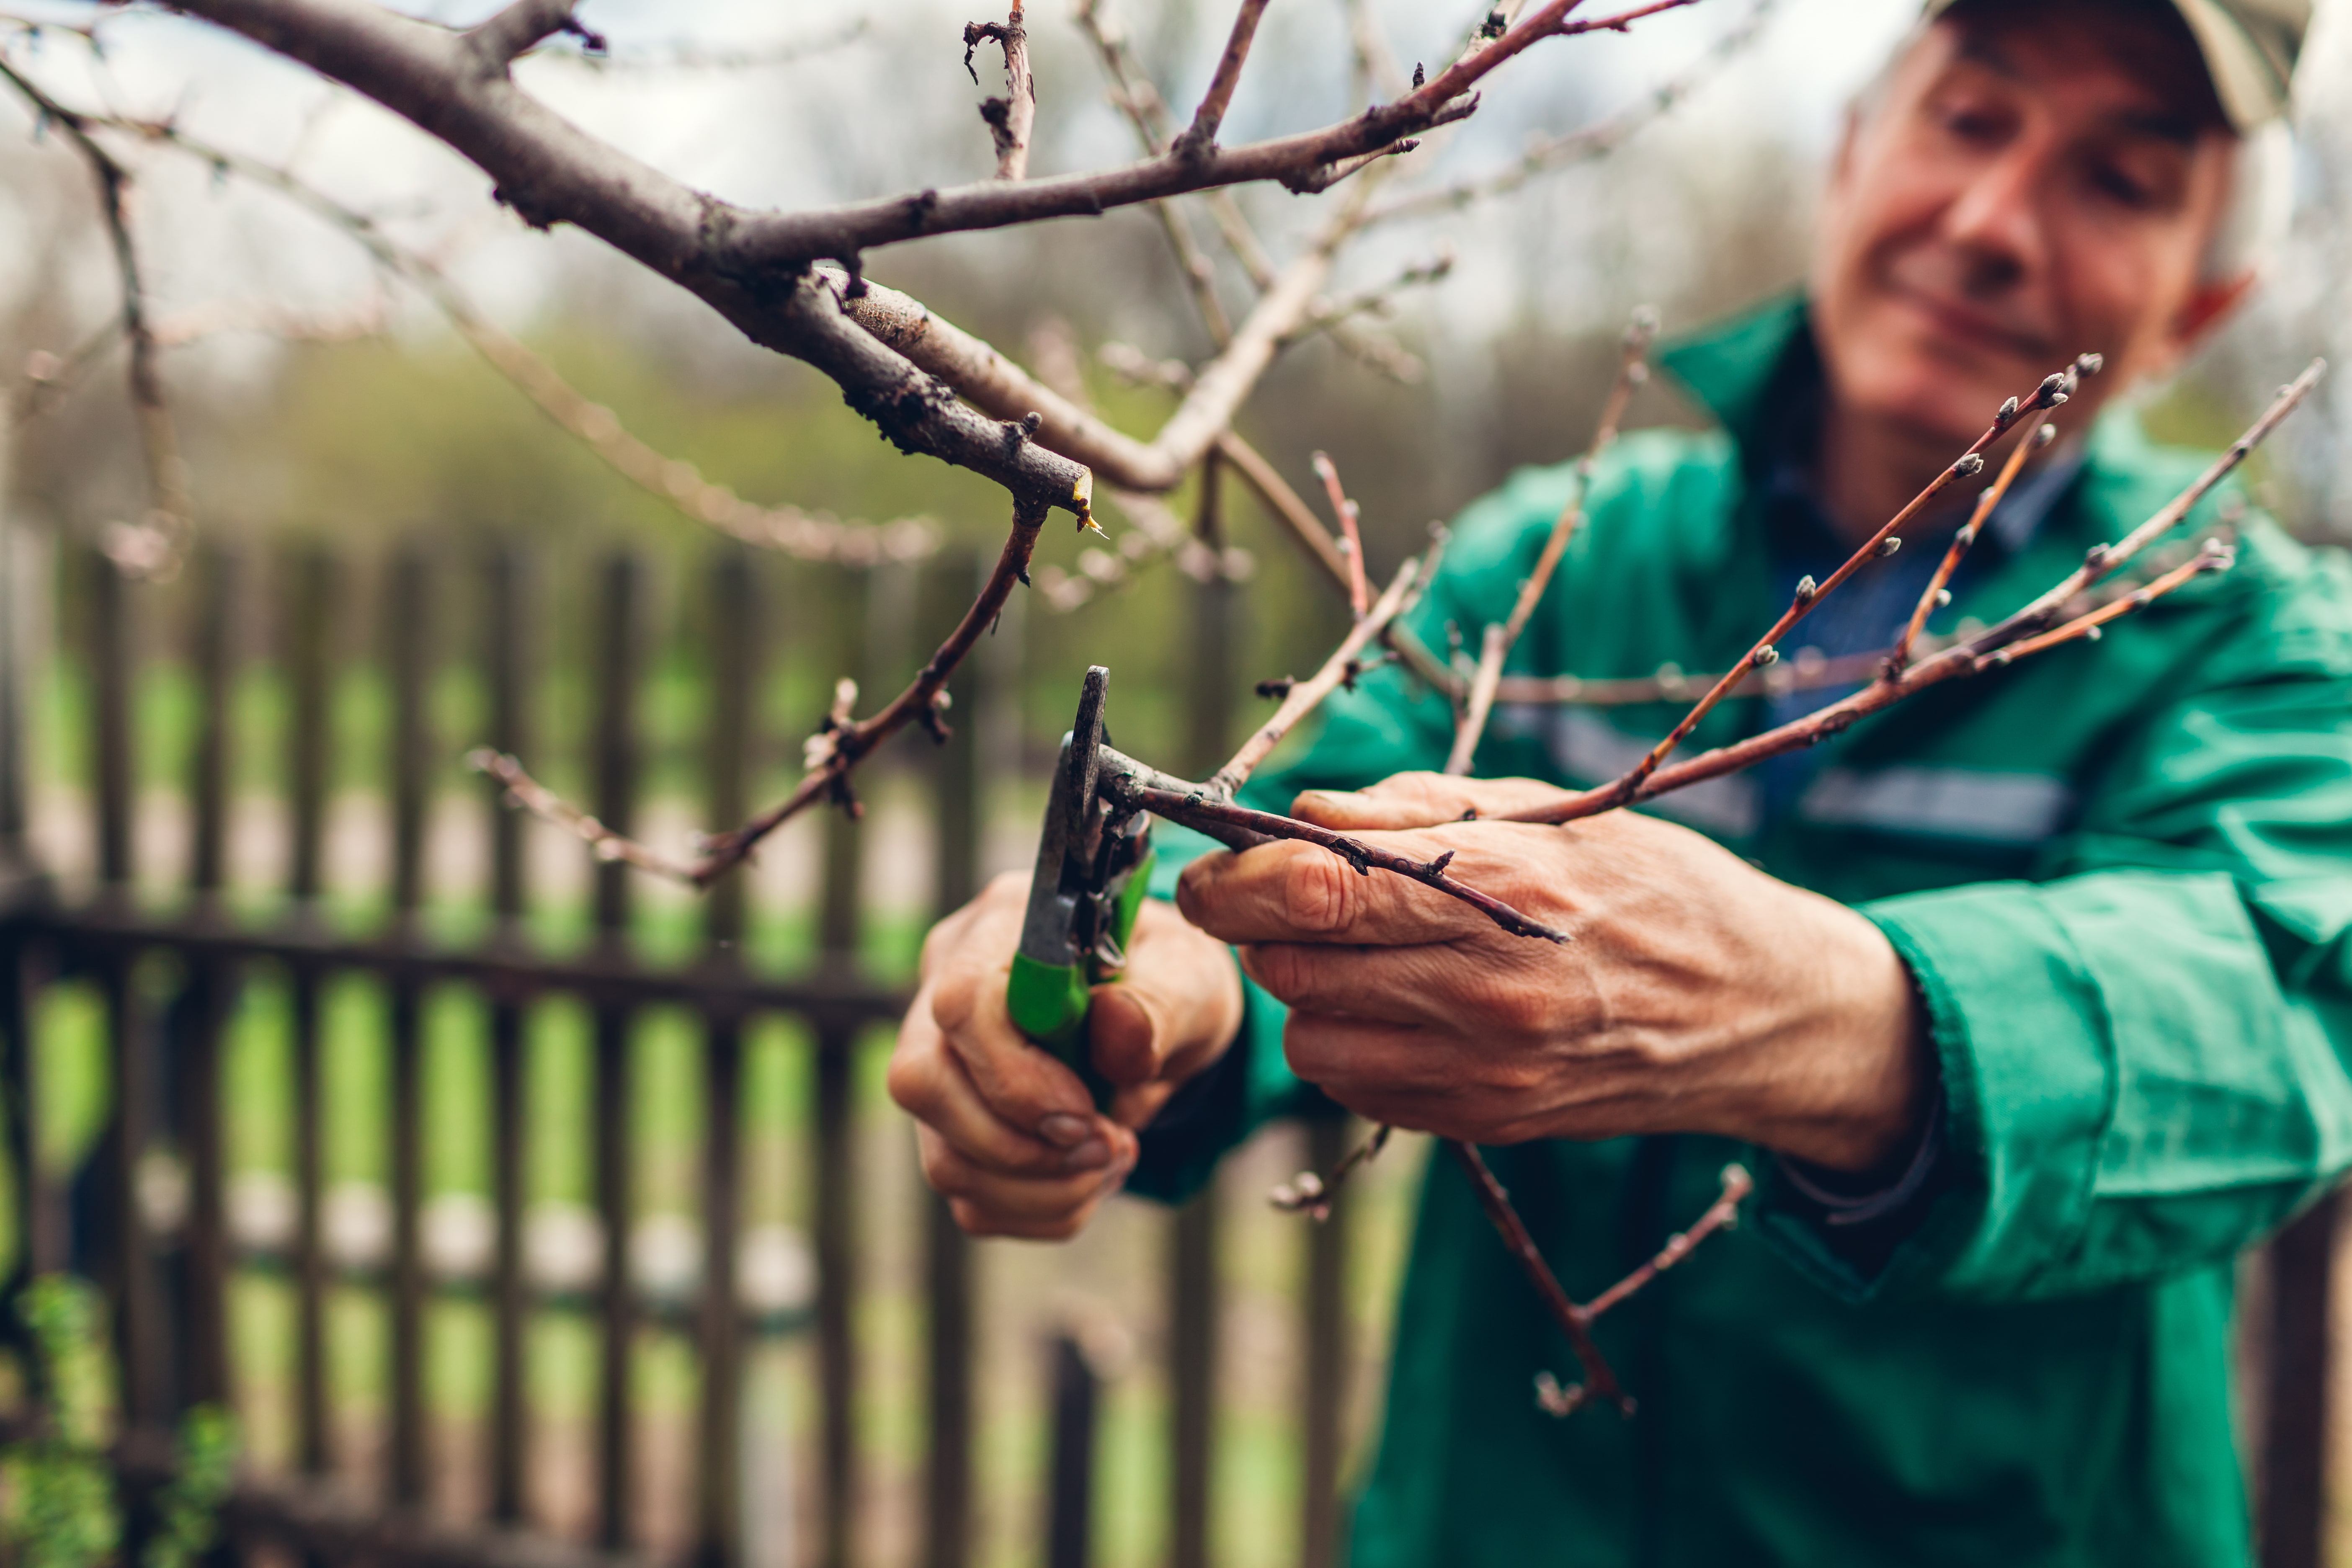 Man worker pruning tree with clippers. Male farmer wearing uniform cuts branches in spring garden with pruning shears or secateurs